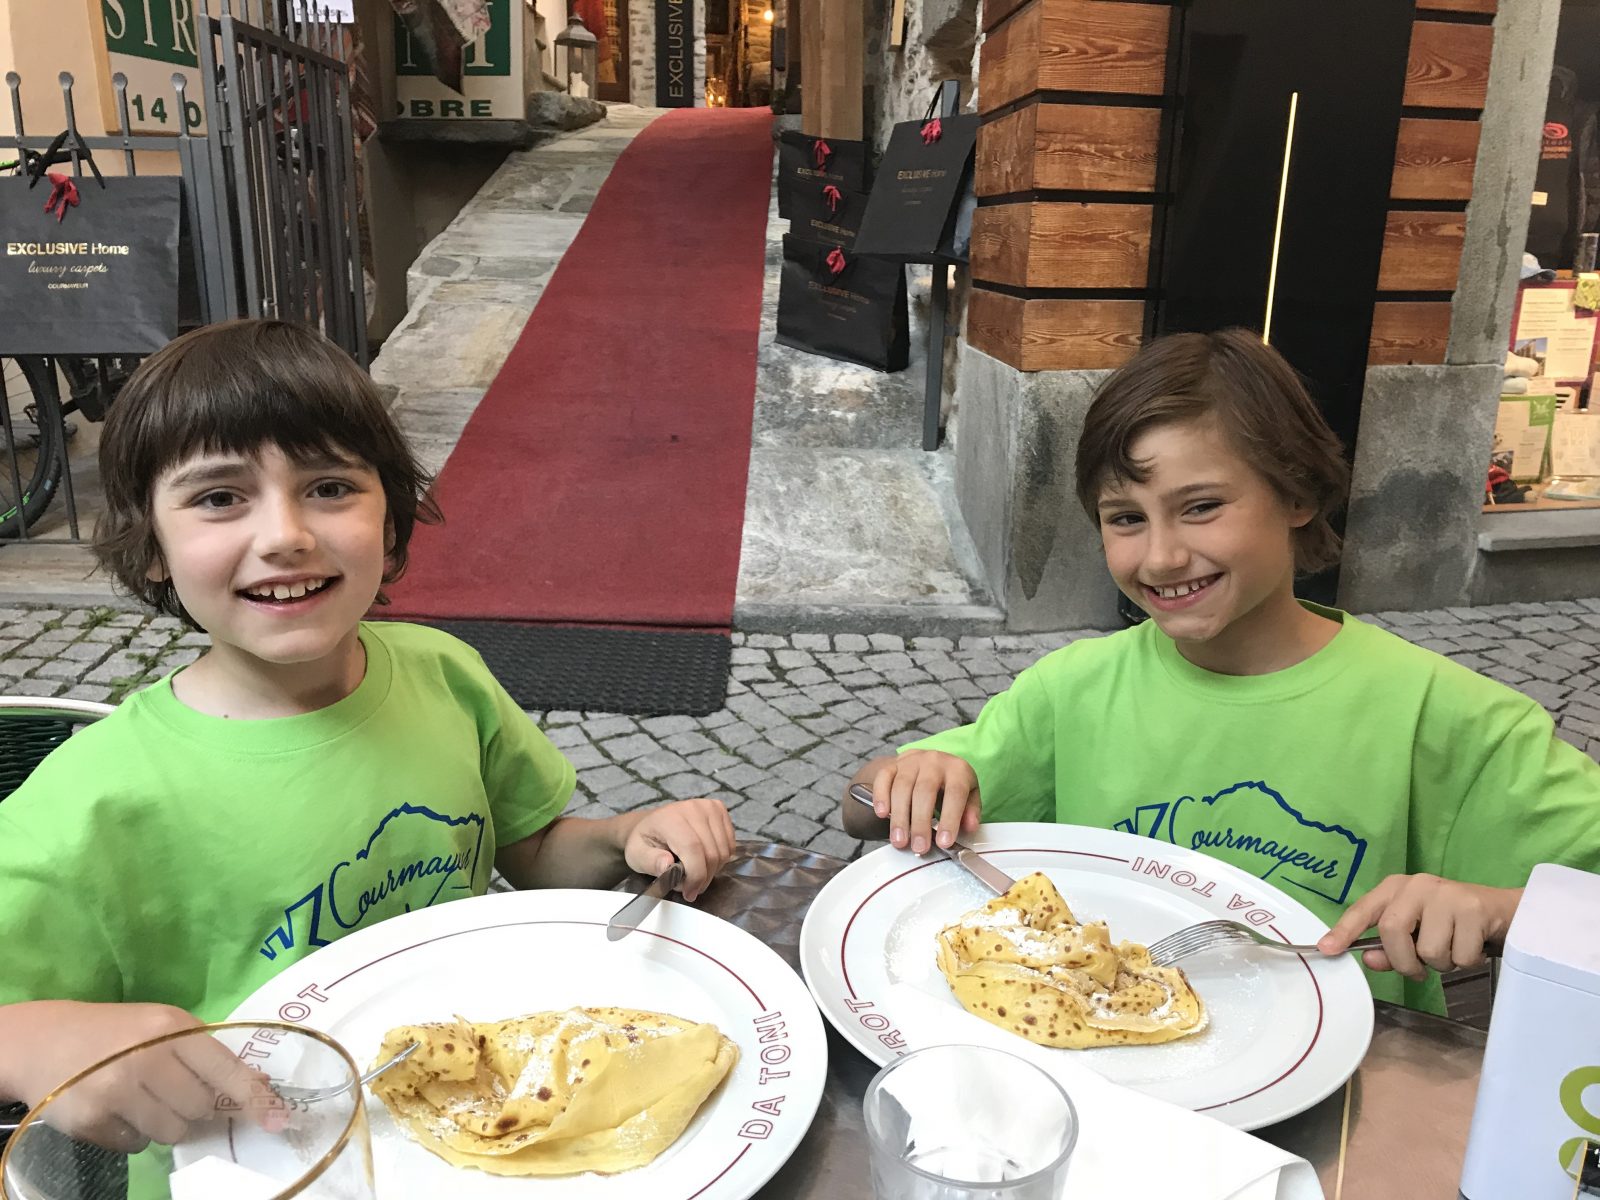 The boys munching their crepes at the Pétit Bistrot Crèperie. Photo: The-Ski-Guru. Our summer in the mountains – one week in Courmayeur.